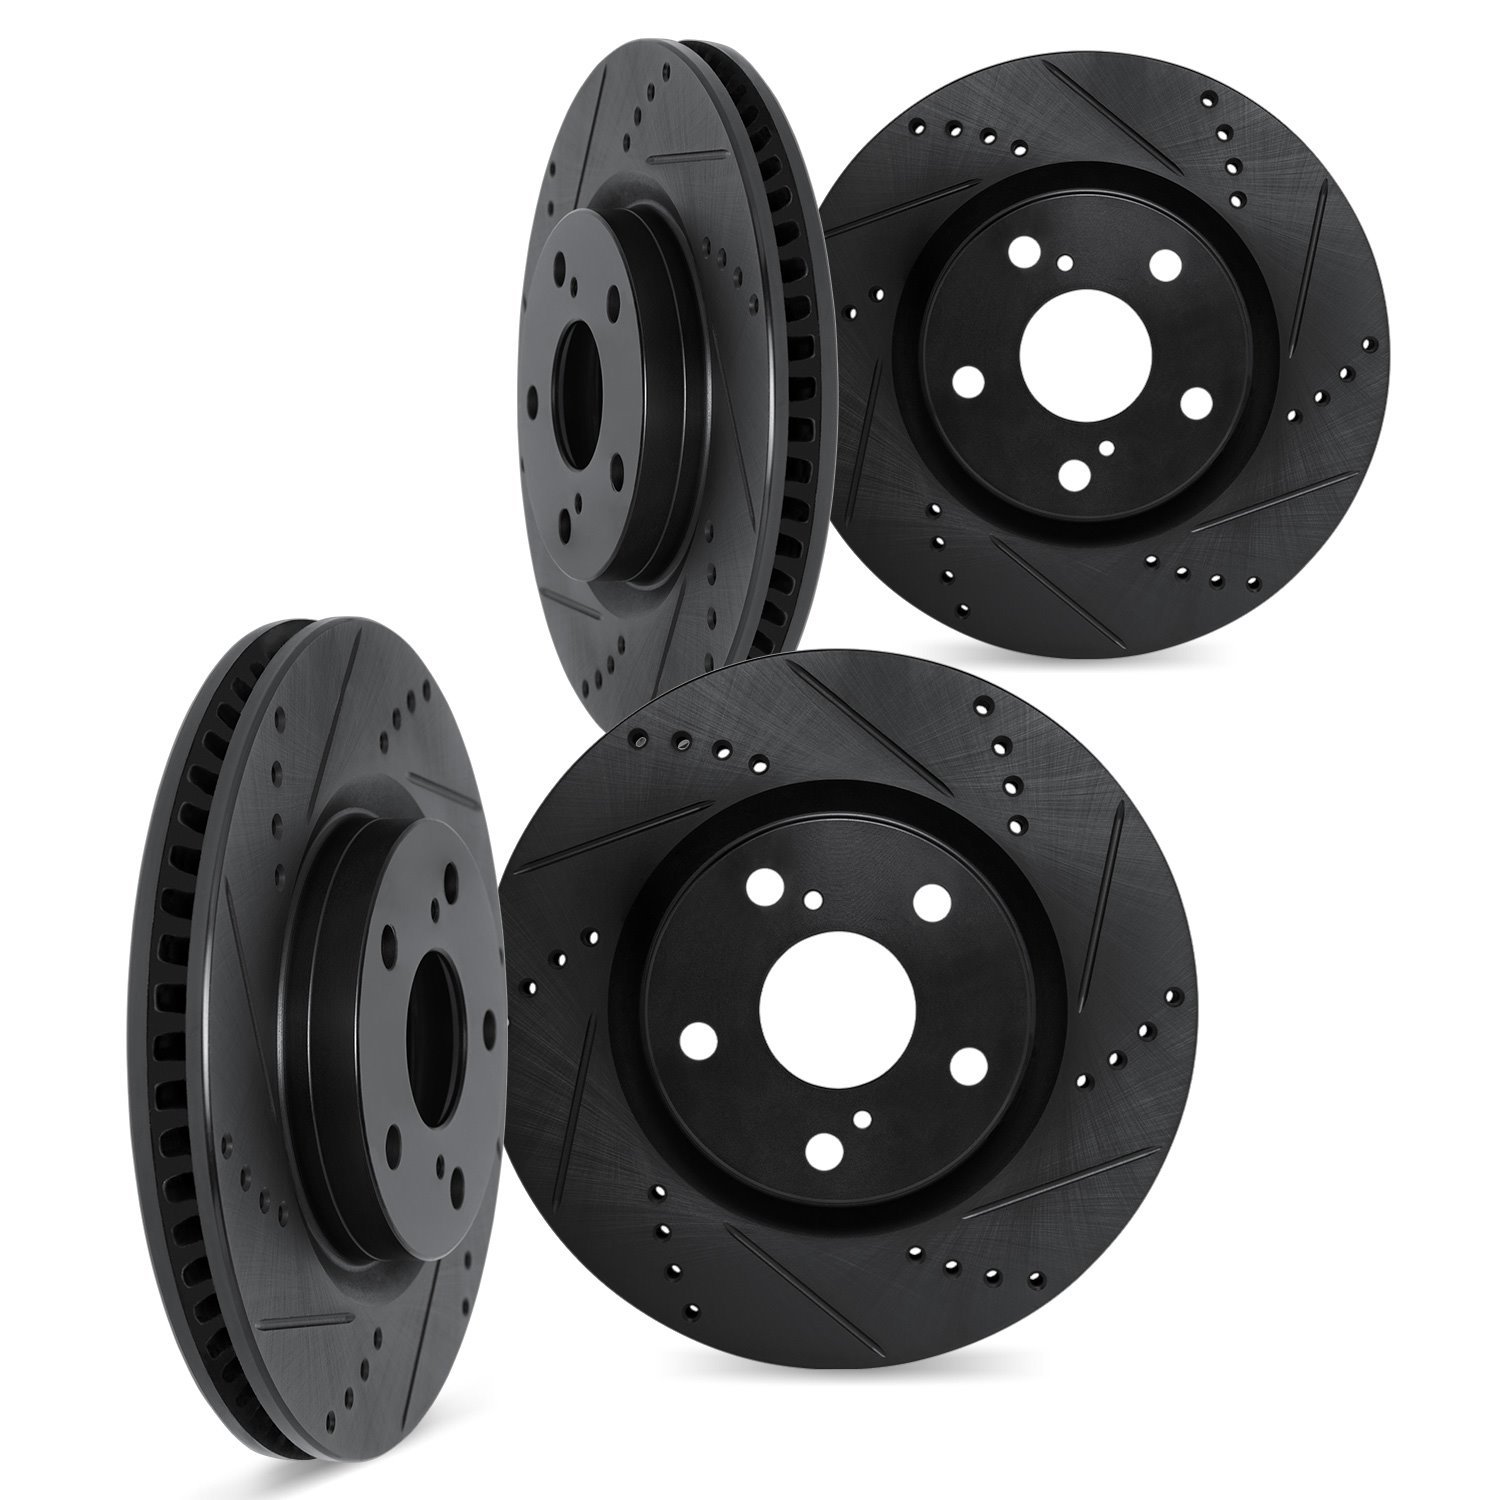 8004-46009 Drilled/Slotted Brake Rotors [Black], 2001-2001 GM, Position: Front and Rear